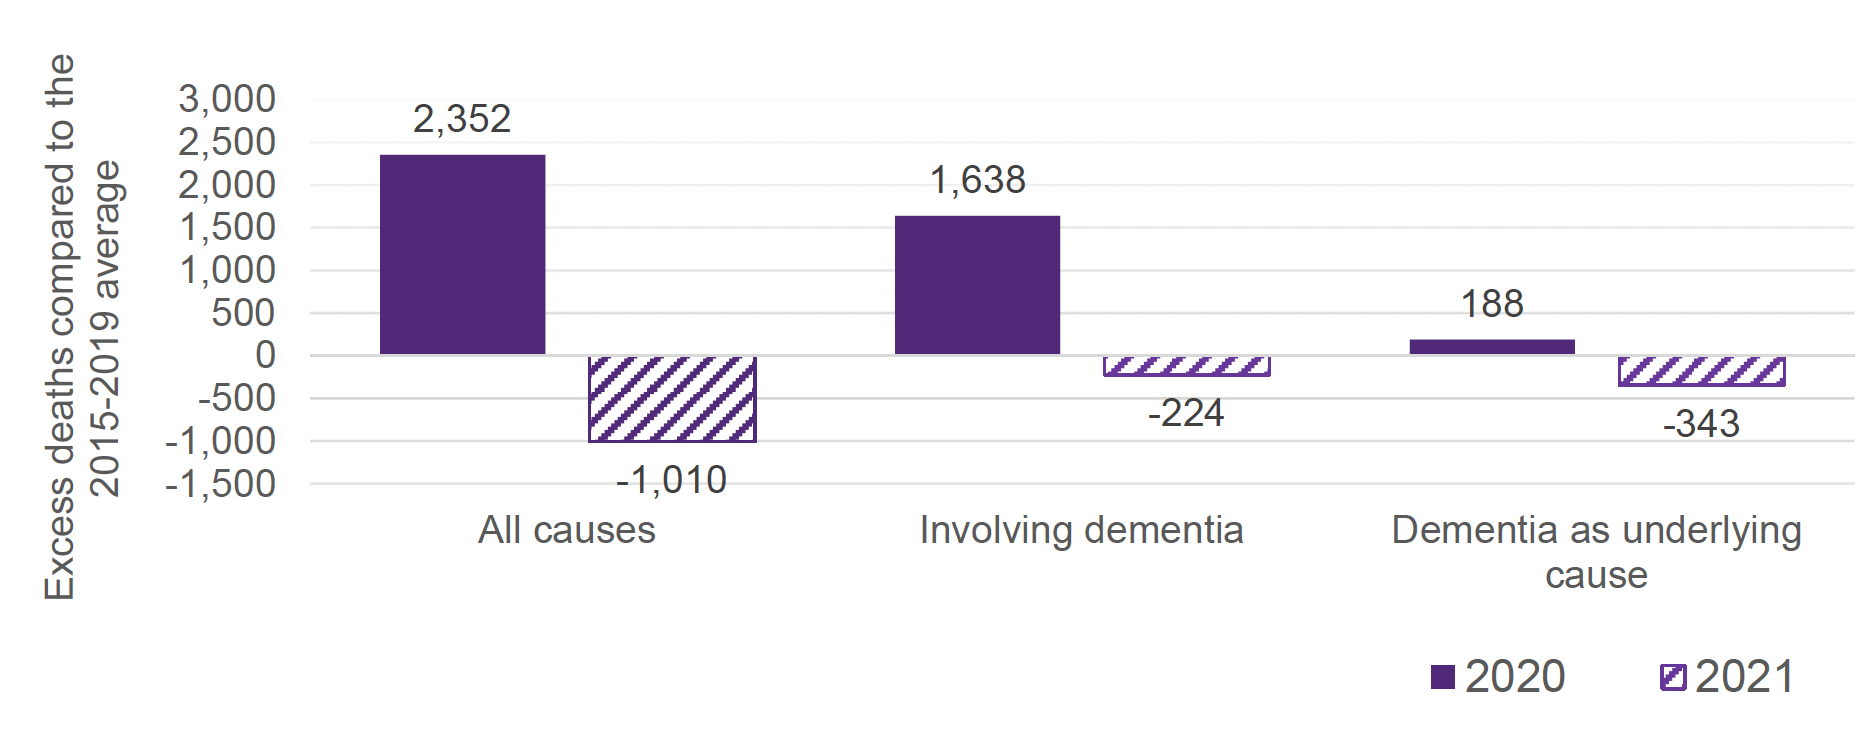 Figure 5: Column chart displaying the number of excess deaths in care homes in 2020 (solid purple) and 2021 (patterned purple) in Scotland compared to the 2015-2019 average; from all causes (left), involving dementia (middle) and dementia as the underlying cause (right).